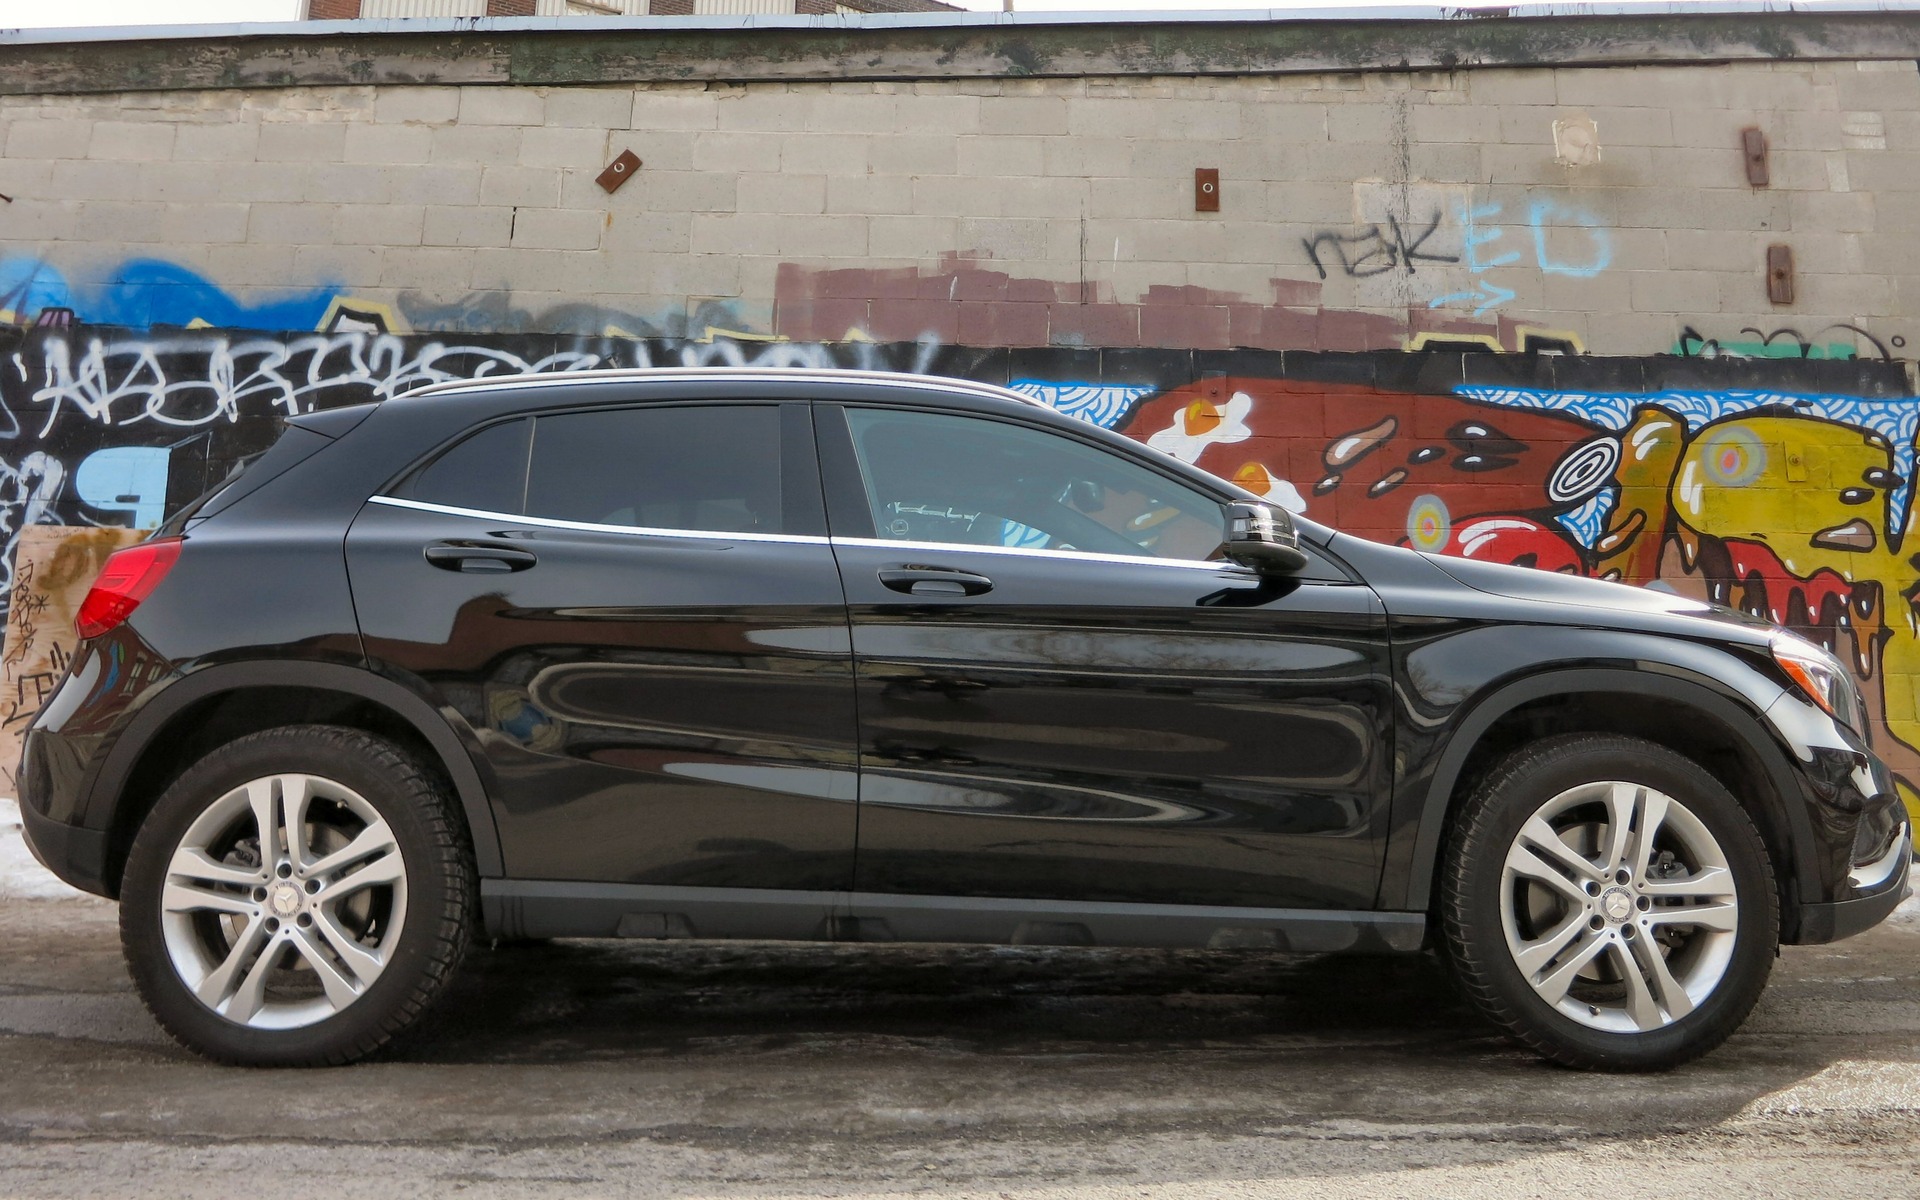 It would be too easy to pick on the GLA250 4MATIC's inoffensive styling.